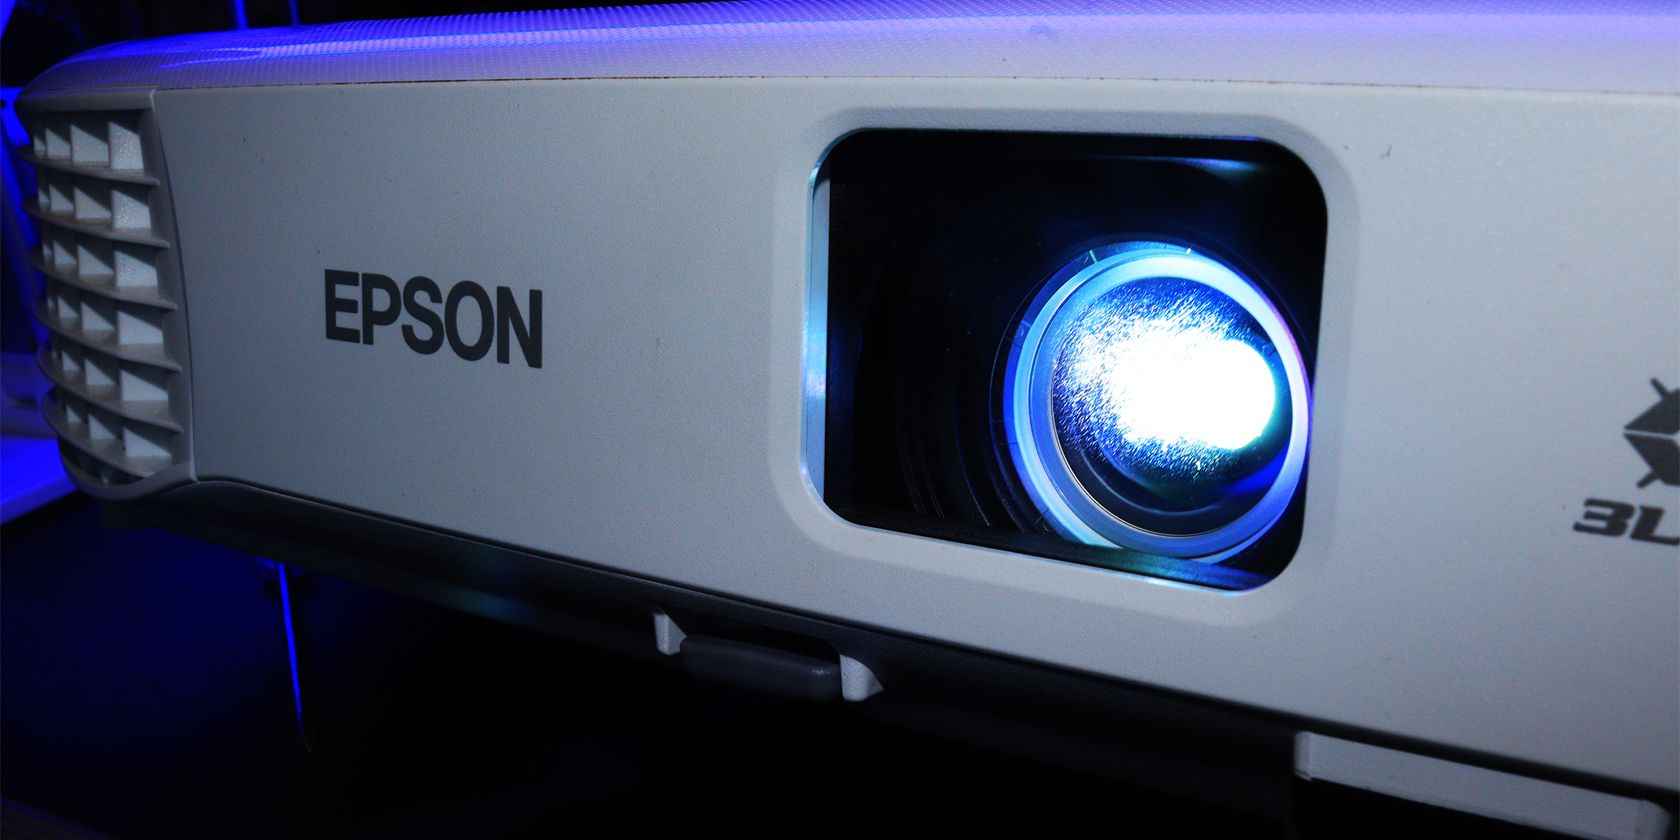 An Epson projector turned on and light emiting from the lens